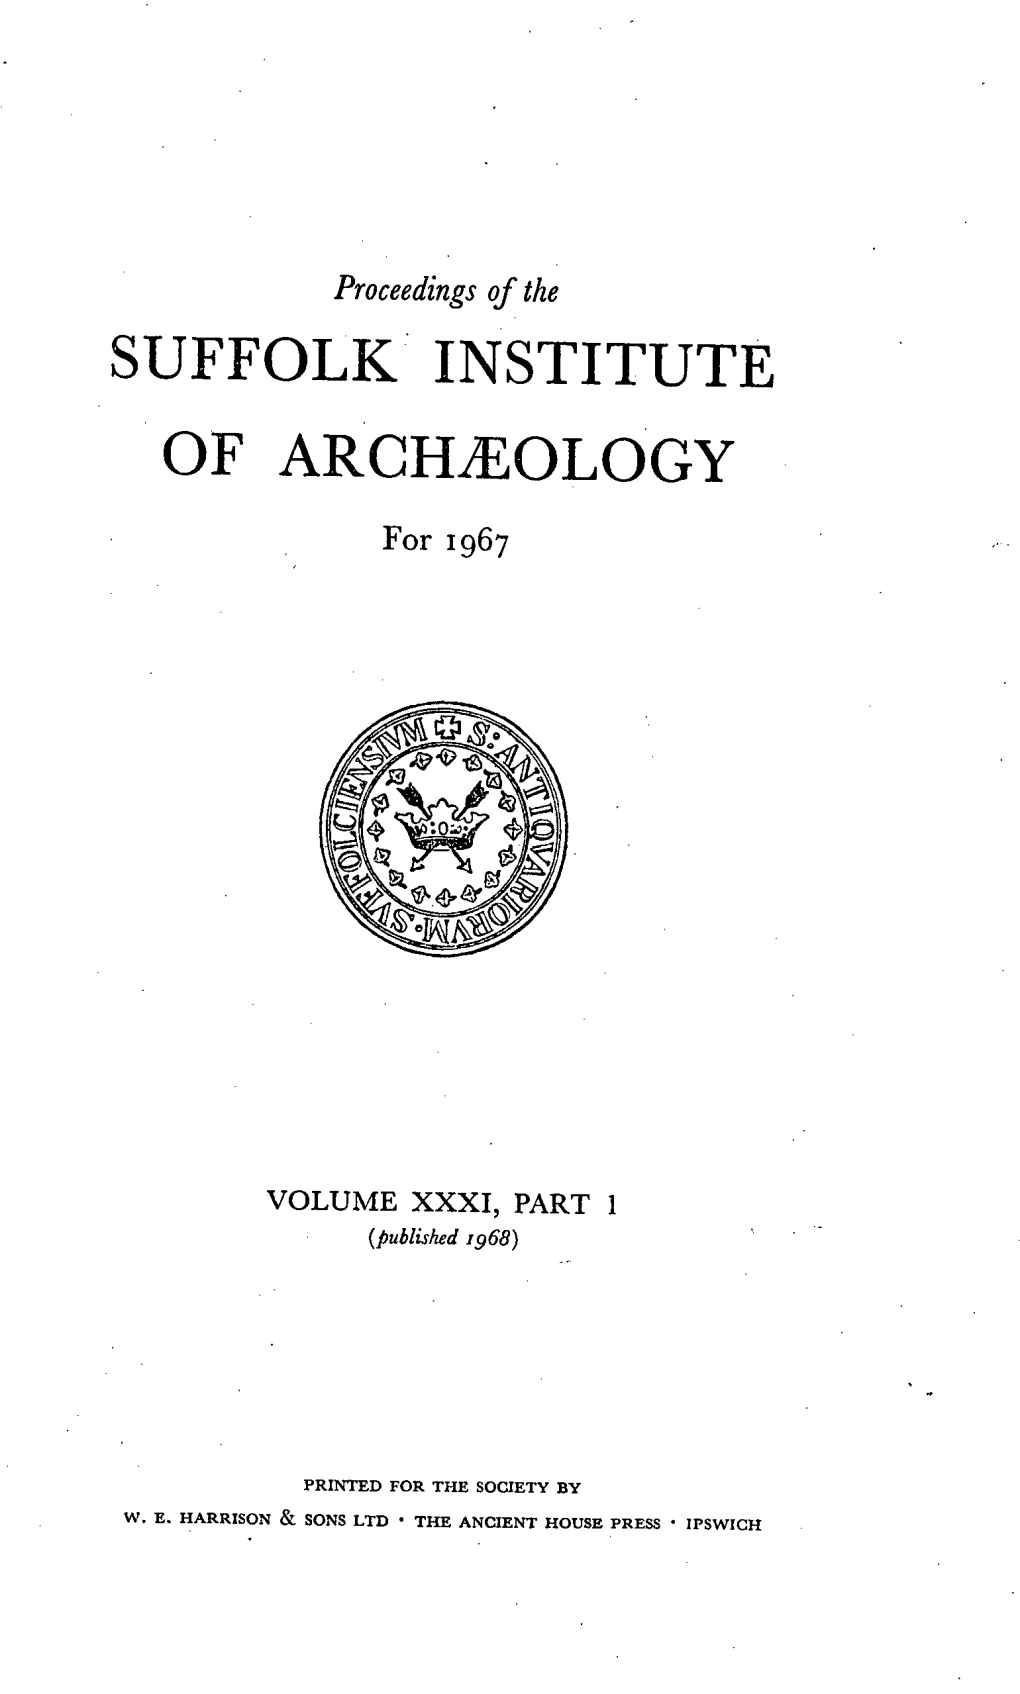 Suffolk Institute of Archaeology